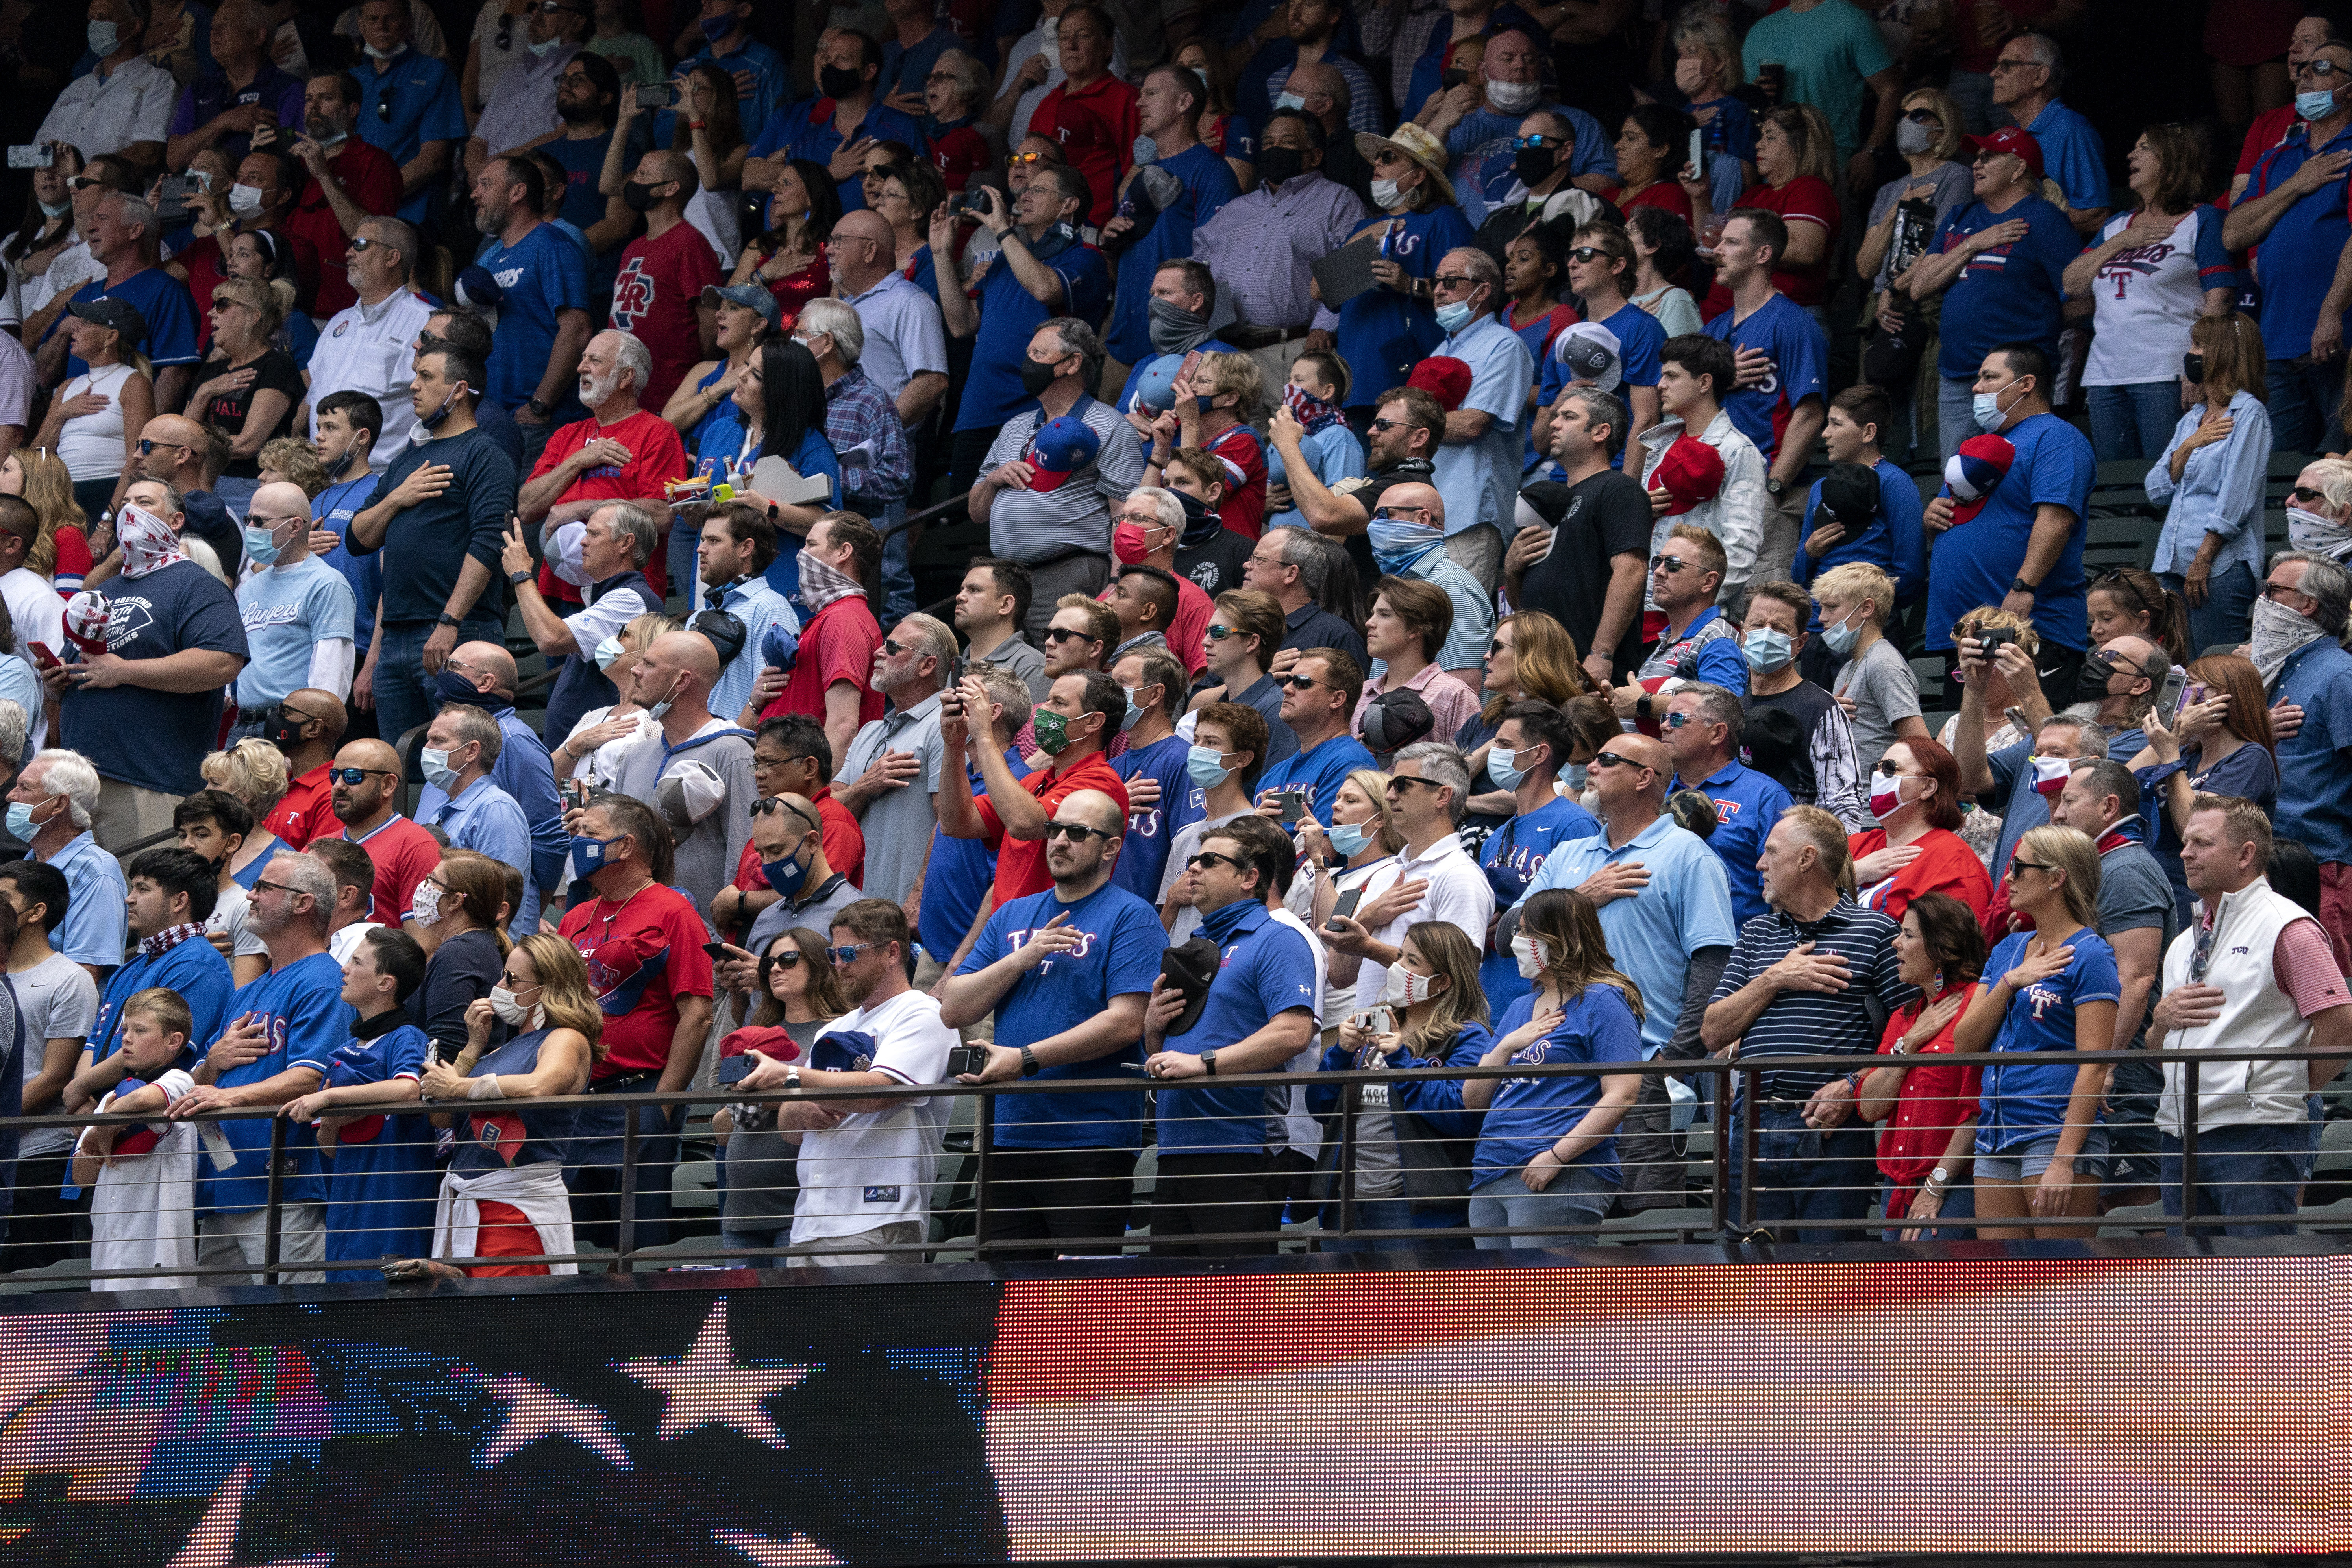 Rangers fill stands with fans, who accept 'calculated risk